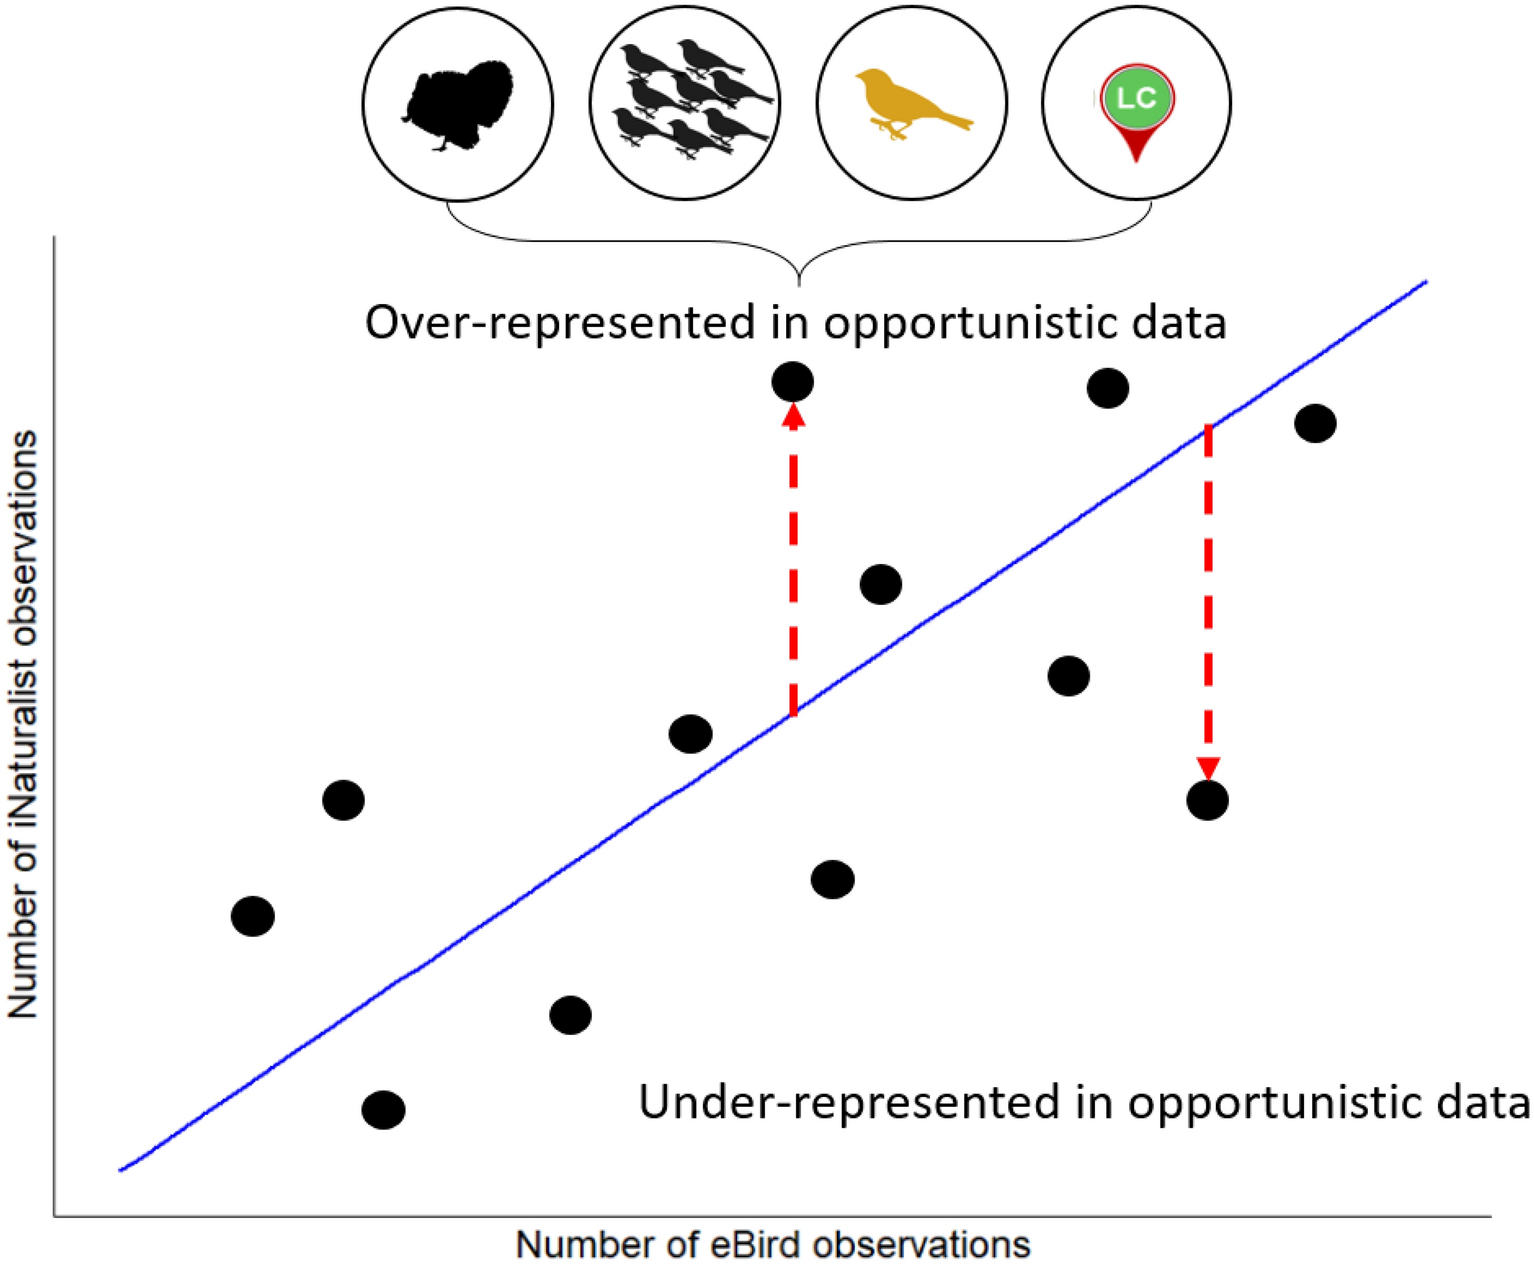 Large-bodied birds are over-represented in unstructured citizen science  data | Scientific Reports